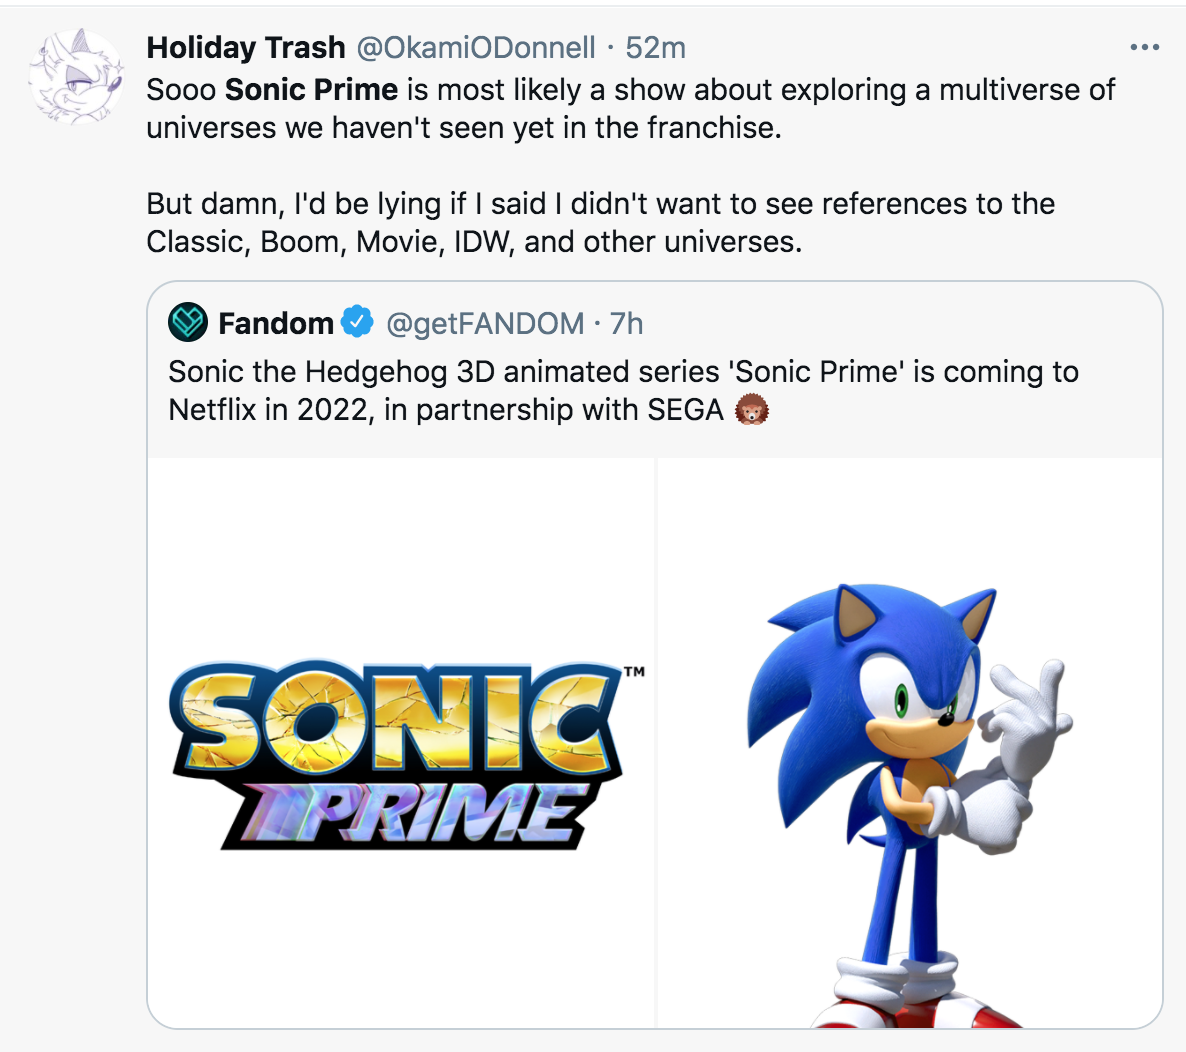 Sonic Prime Netflix - Sooo Sonic Prime is most ly a show about exploring a multiverse of universes we haven't seen yet in the franchise. But damn, I'd be lying if I said I didn't want to see references to the Classic, Boom, Movie, Idw,